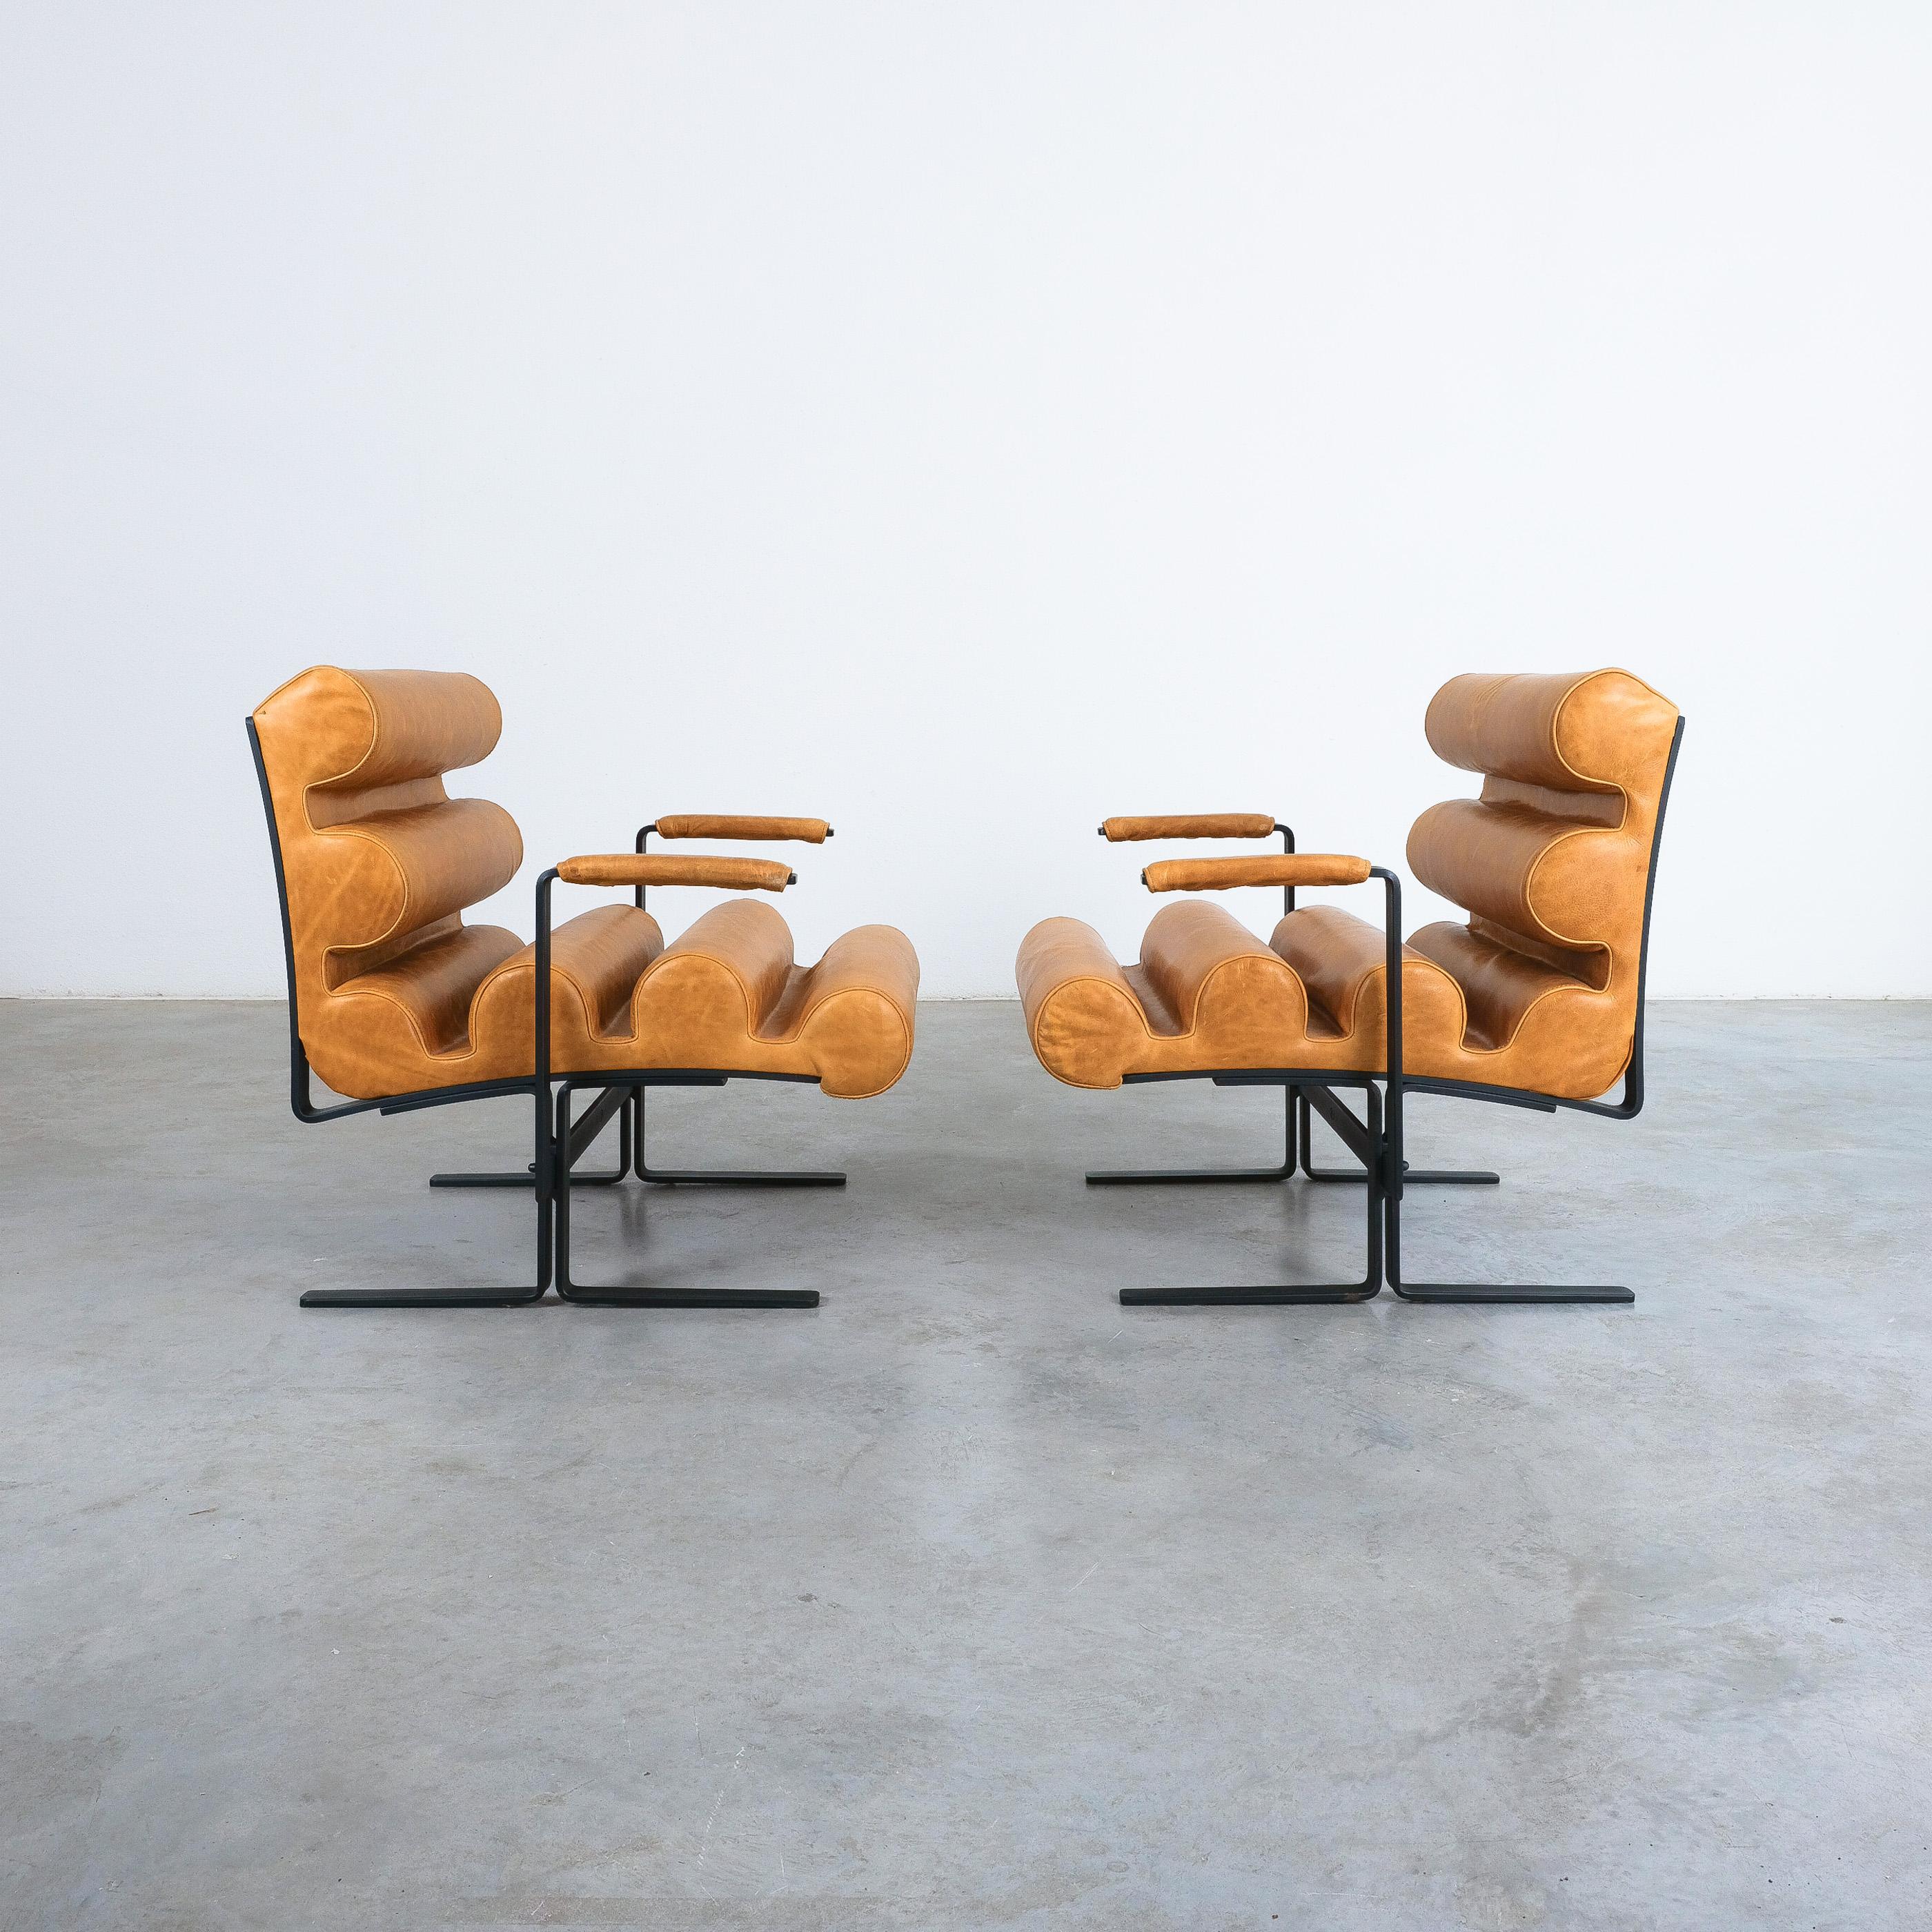 Joe Colombo For Sormani Roll Brown Leather Spring Steel Armchair Pair (2) , 1962 For Sale 8